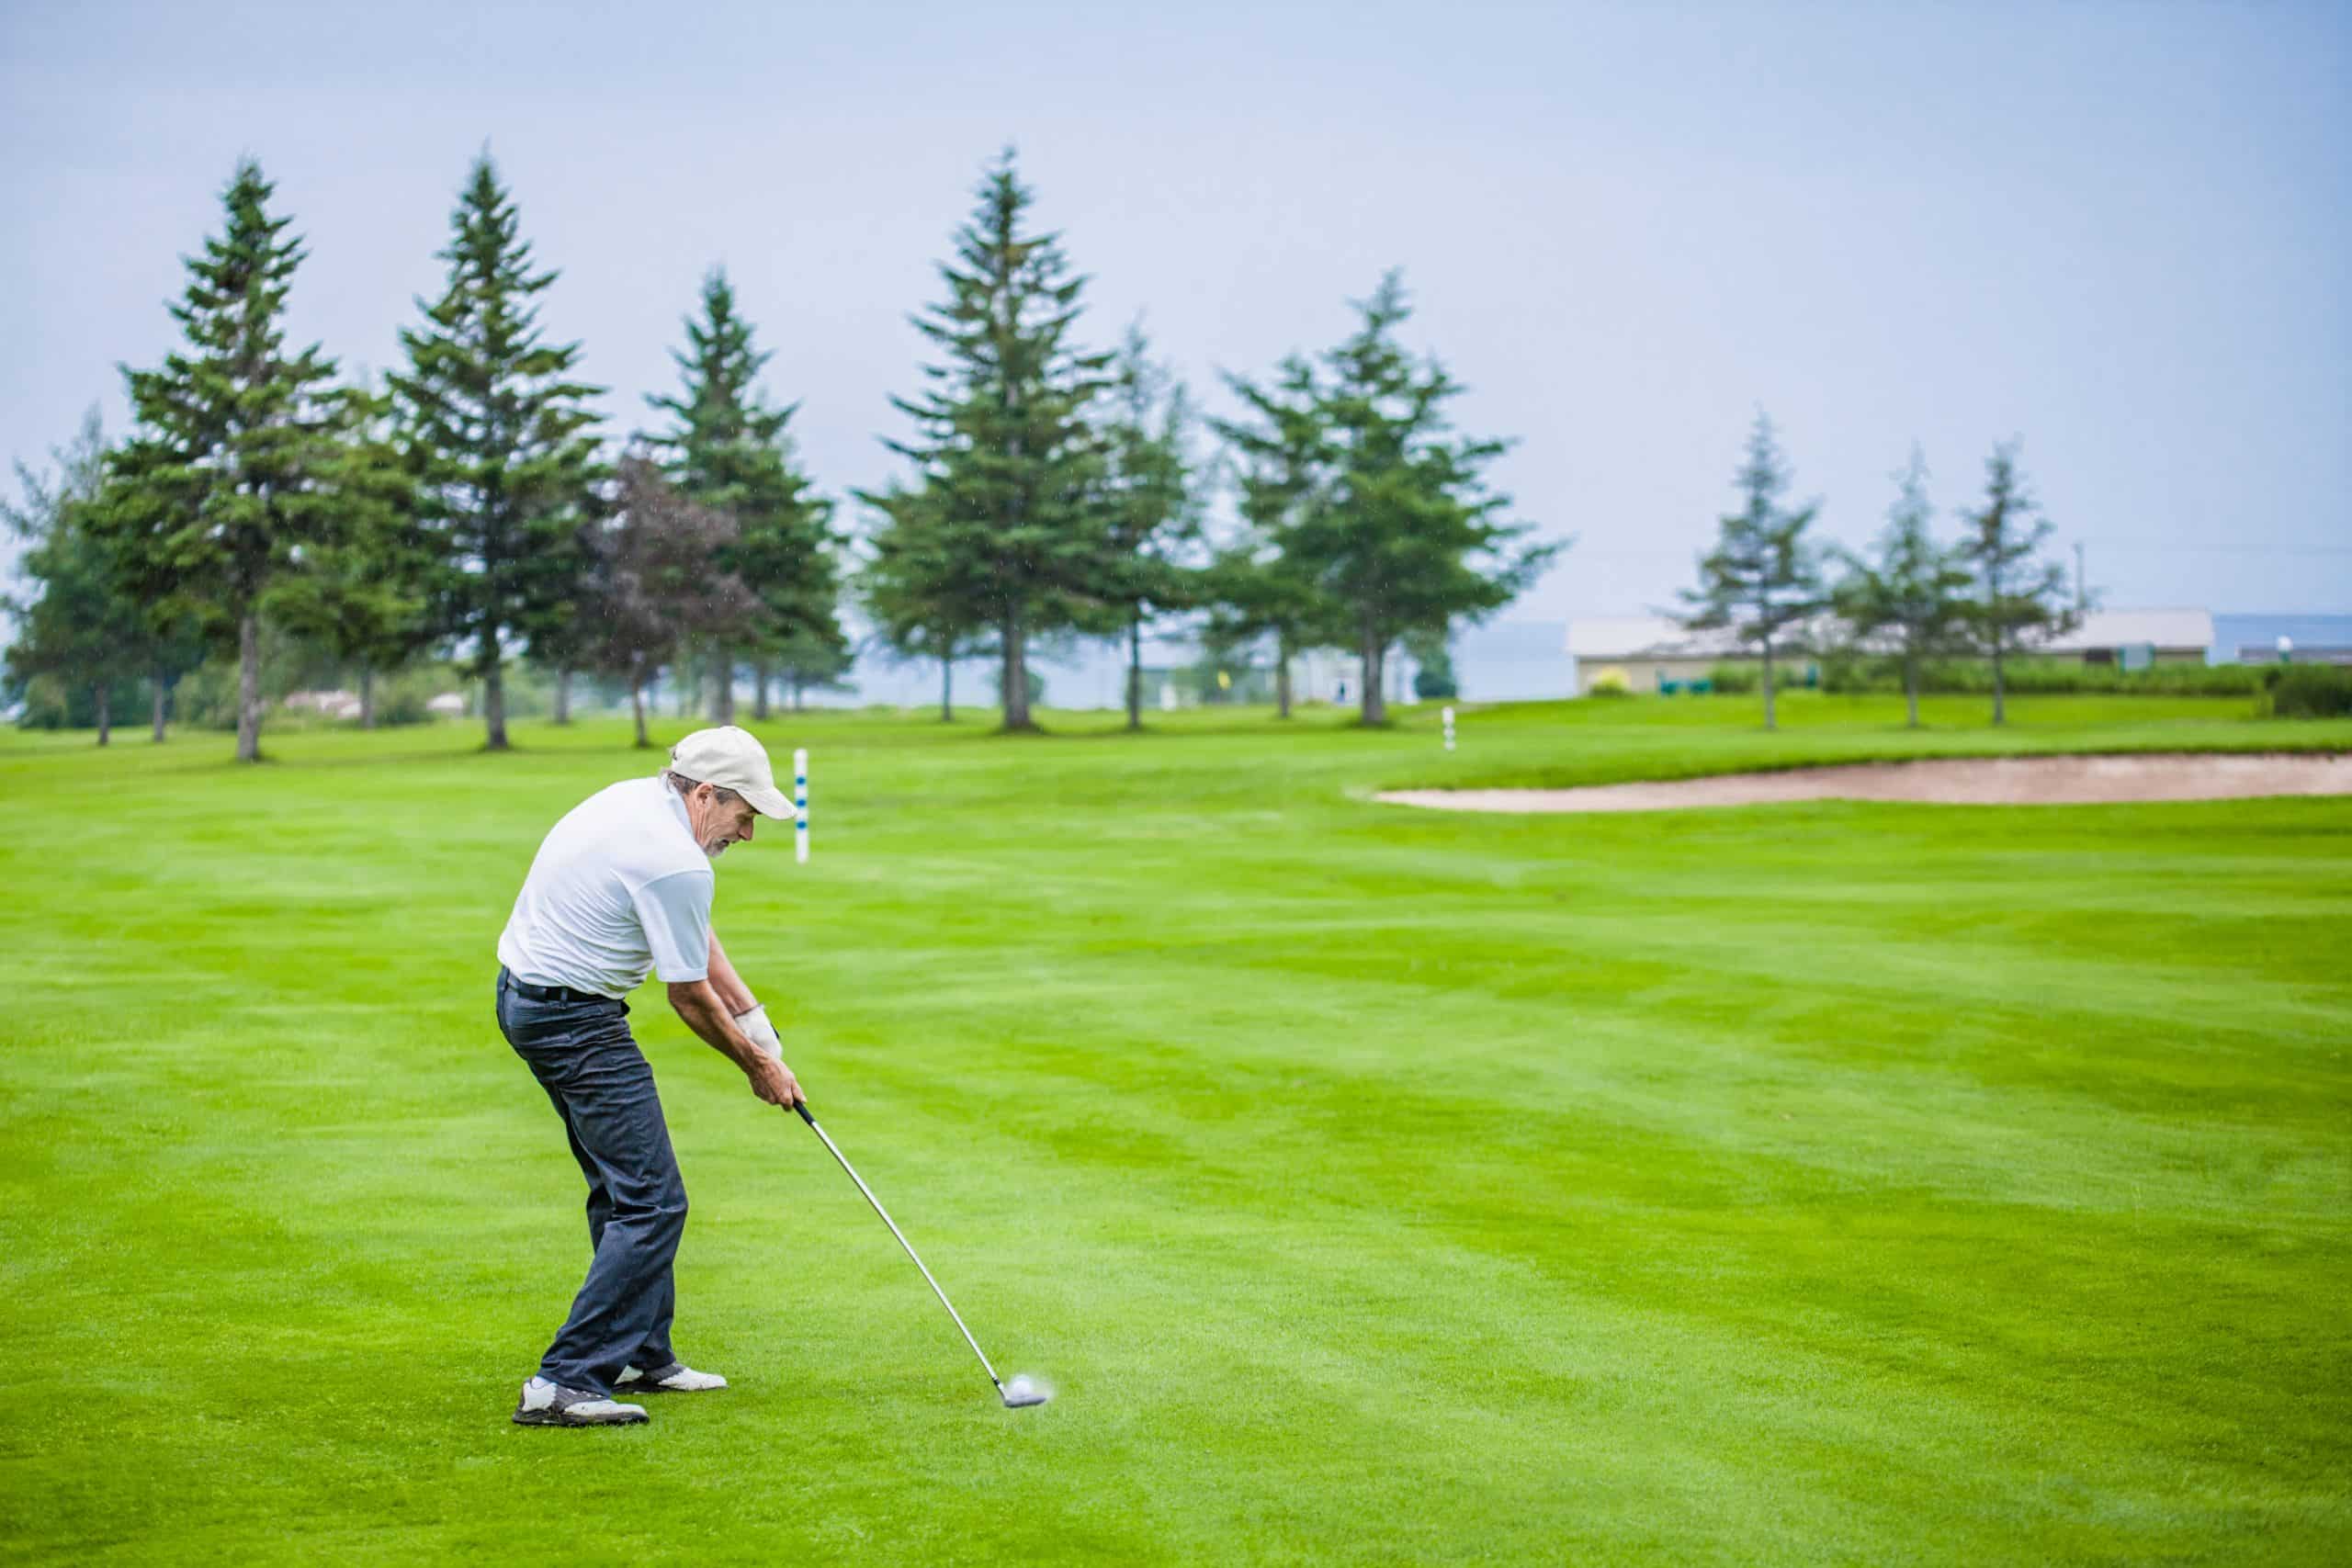 4 Tips To Make Golf More Exciting